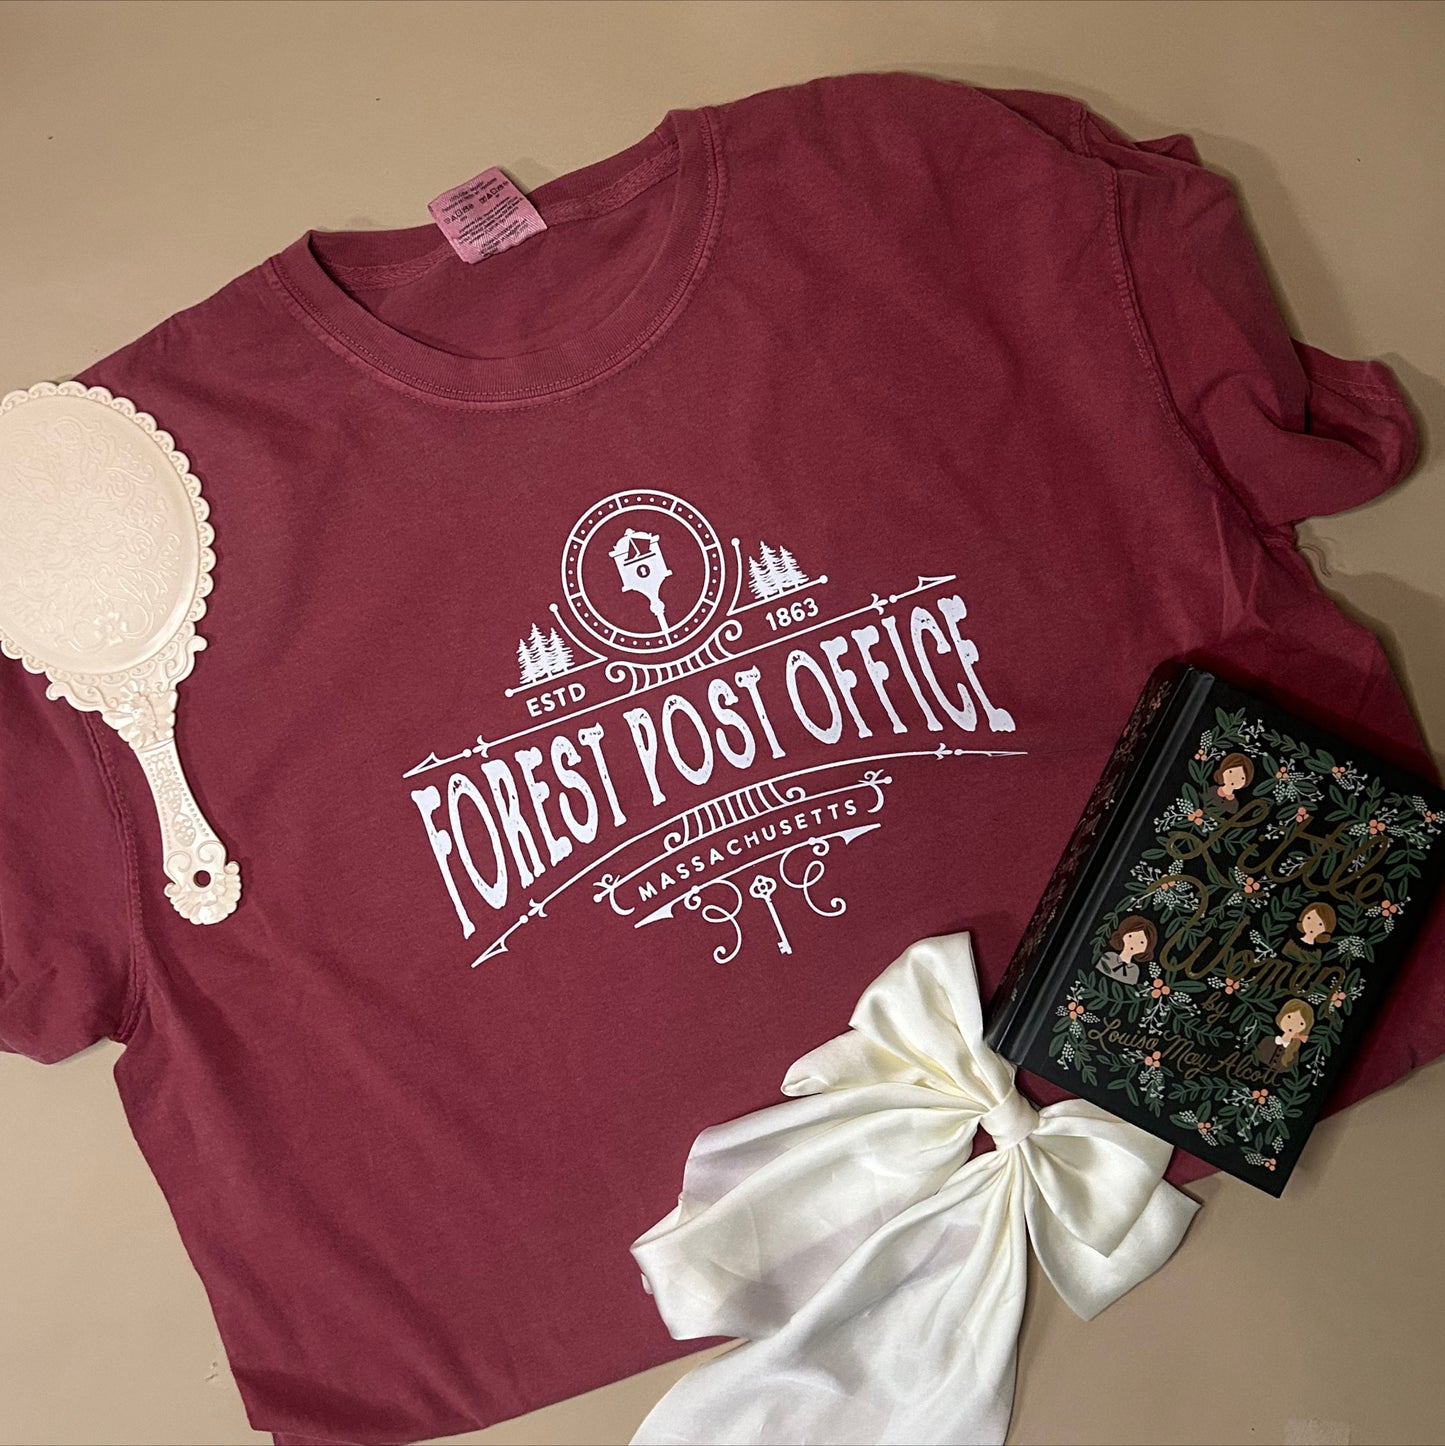 Forest Post Office Tee